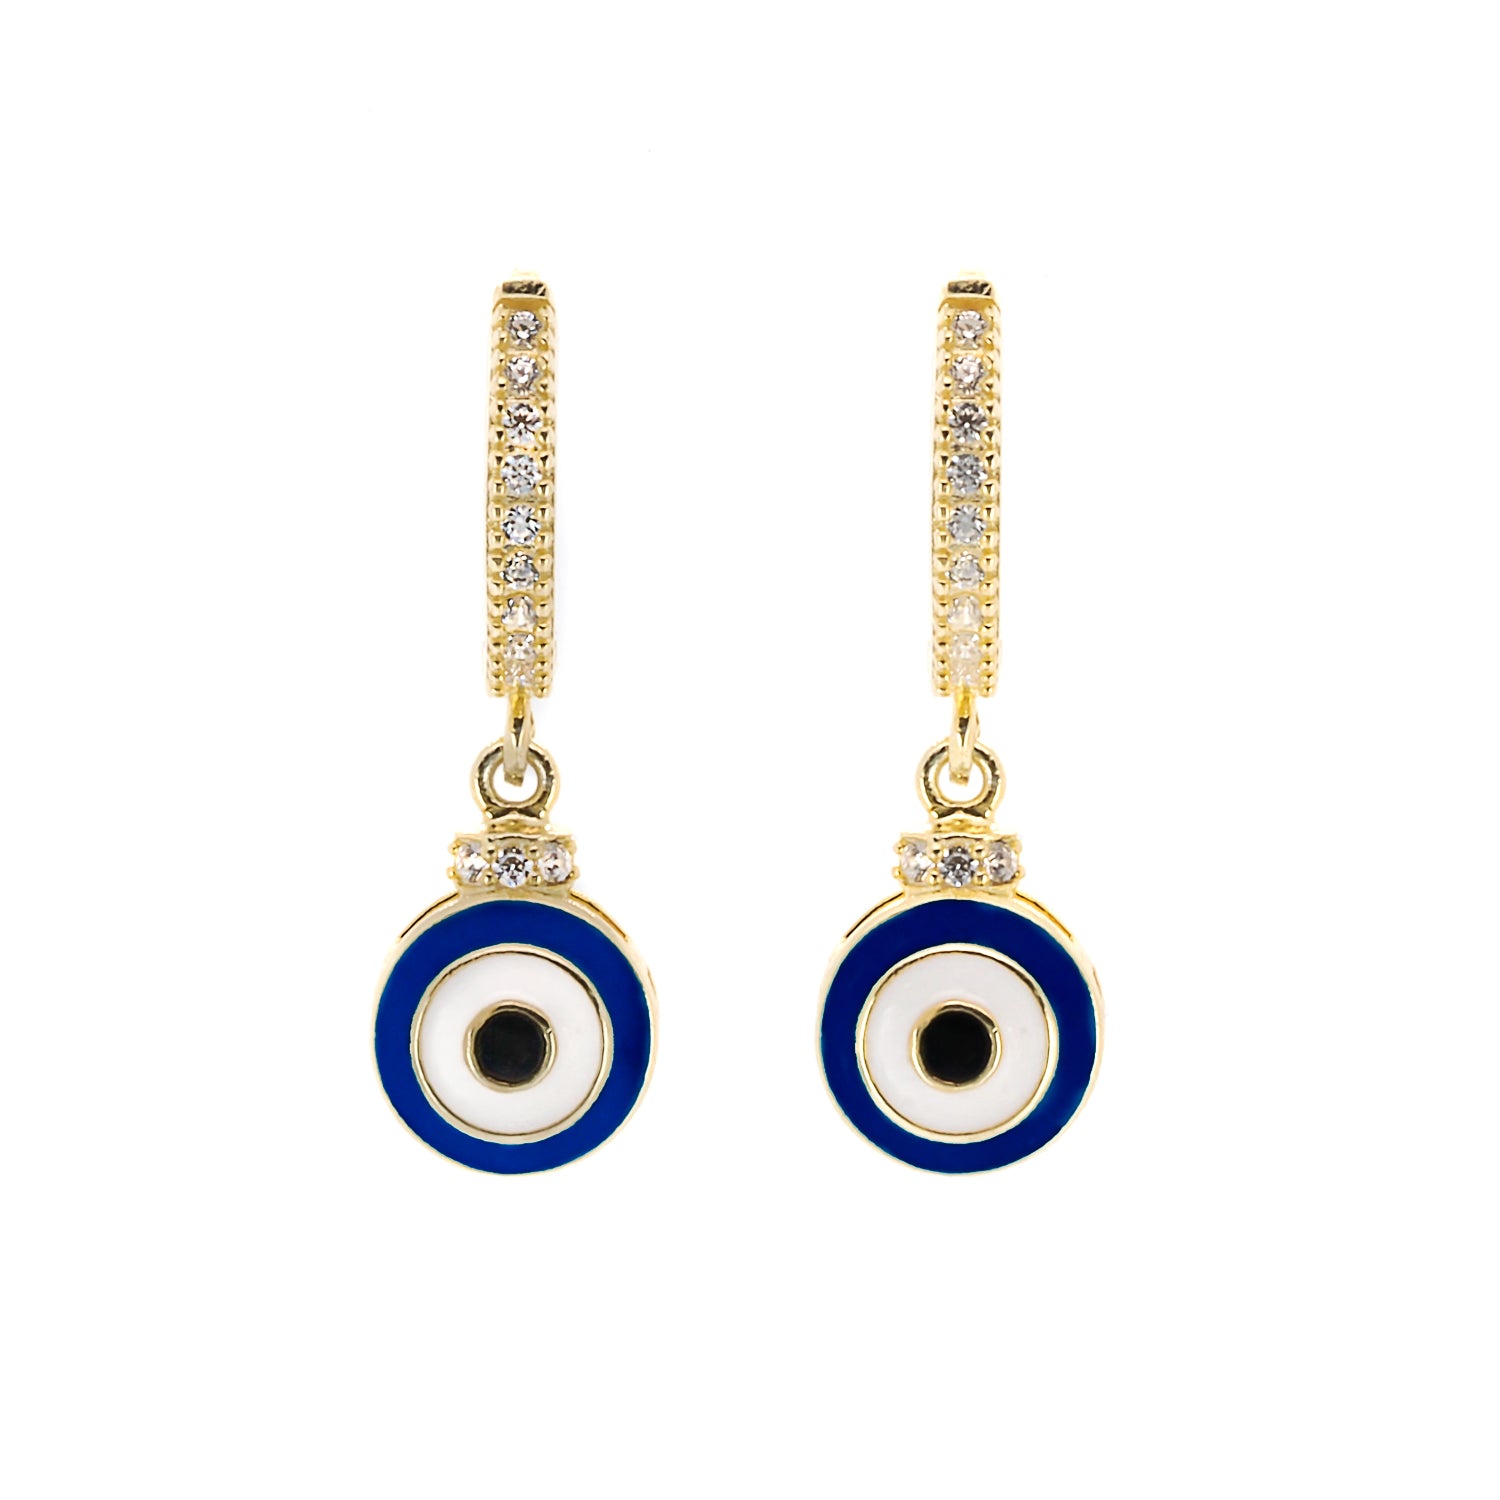 Blue Evil Eye Gold Earrings with gold-plated sterling silver and zircon stones